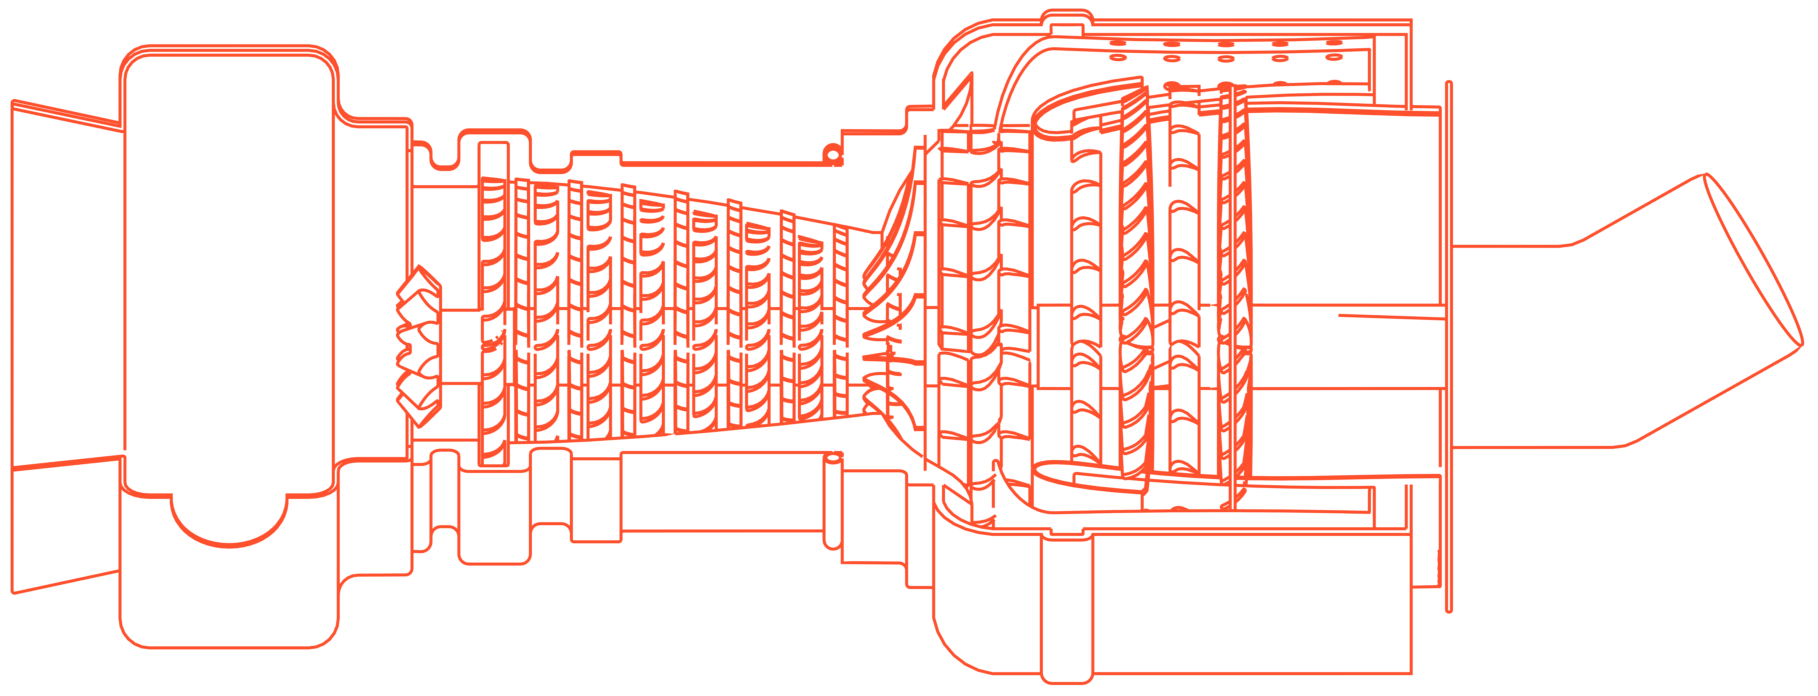 technical drawing of a turbine